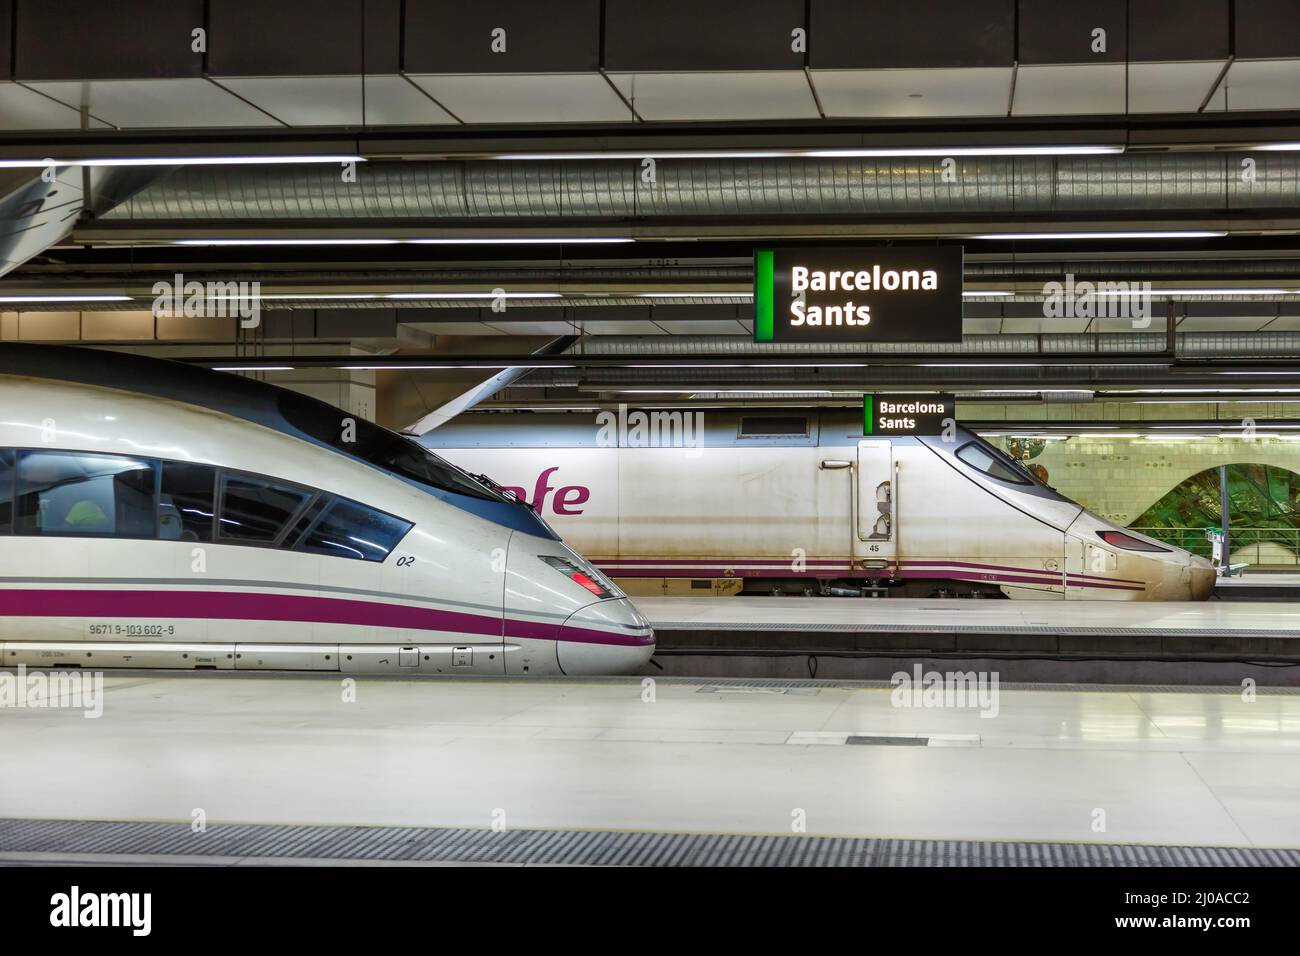 Barcelona, Spain - February 19, 2022: AVE high-speed trains operated by RENFE rail at Barcelona Sants railway station in Barcelona, Spain. Stock Photo